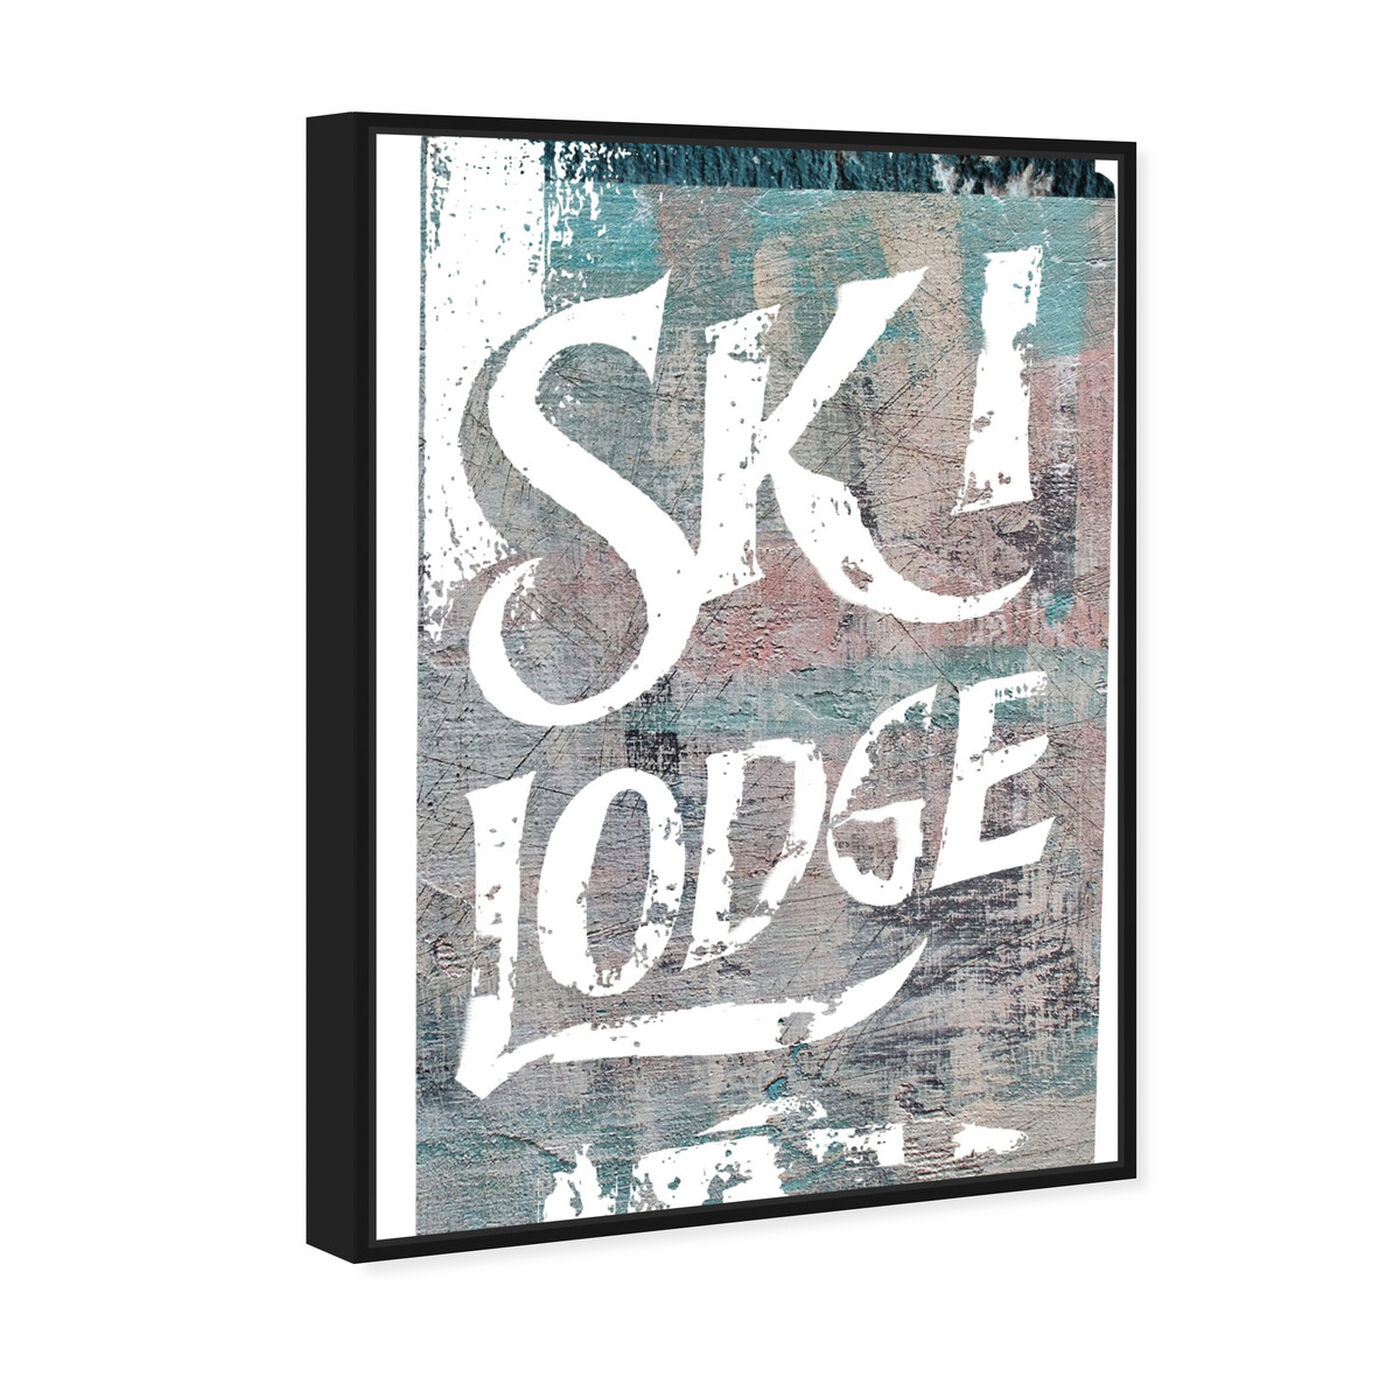 Angled view of Ski Lodge featuring sports and teams and skiing art.